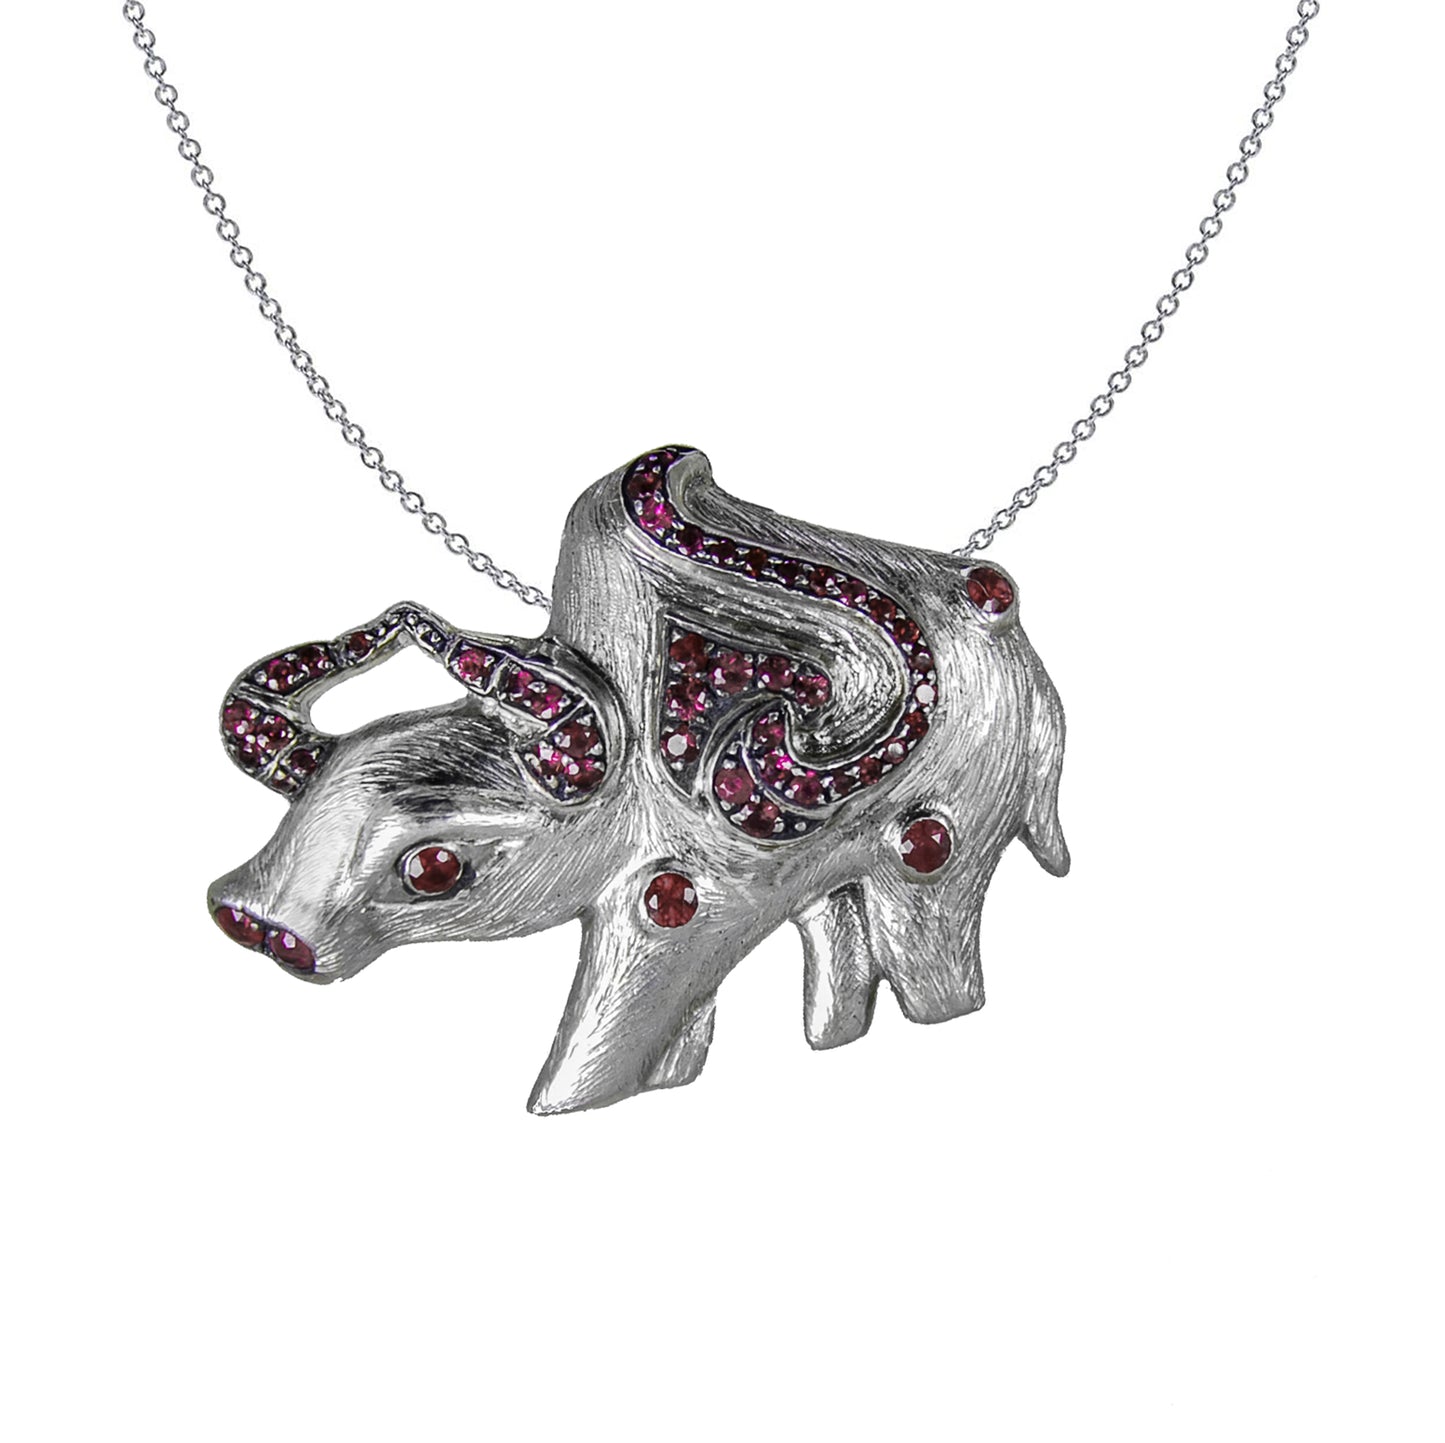 Ox Pendant in Sterling Silver adorned with Rubies decorating the eye, nose and horns, and a ruyi motif, displayed on a chain.